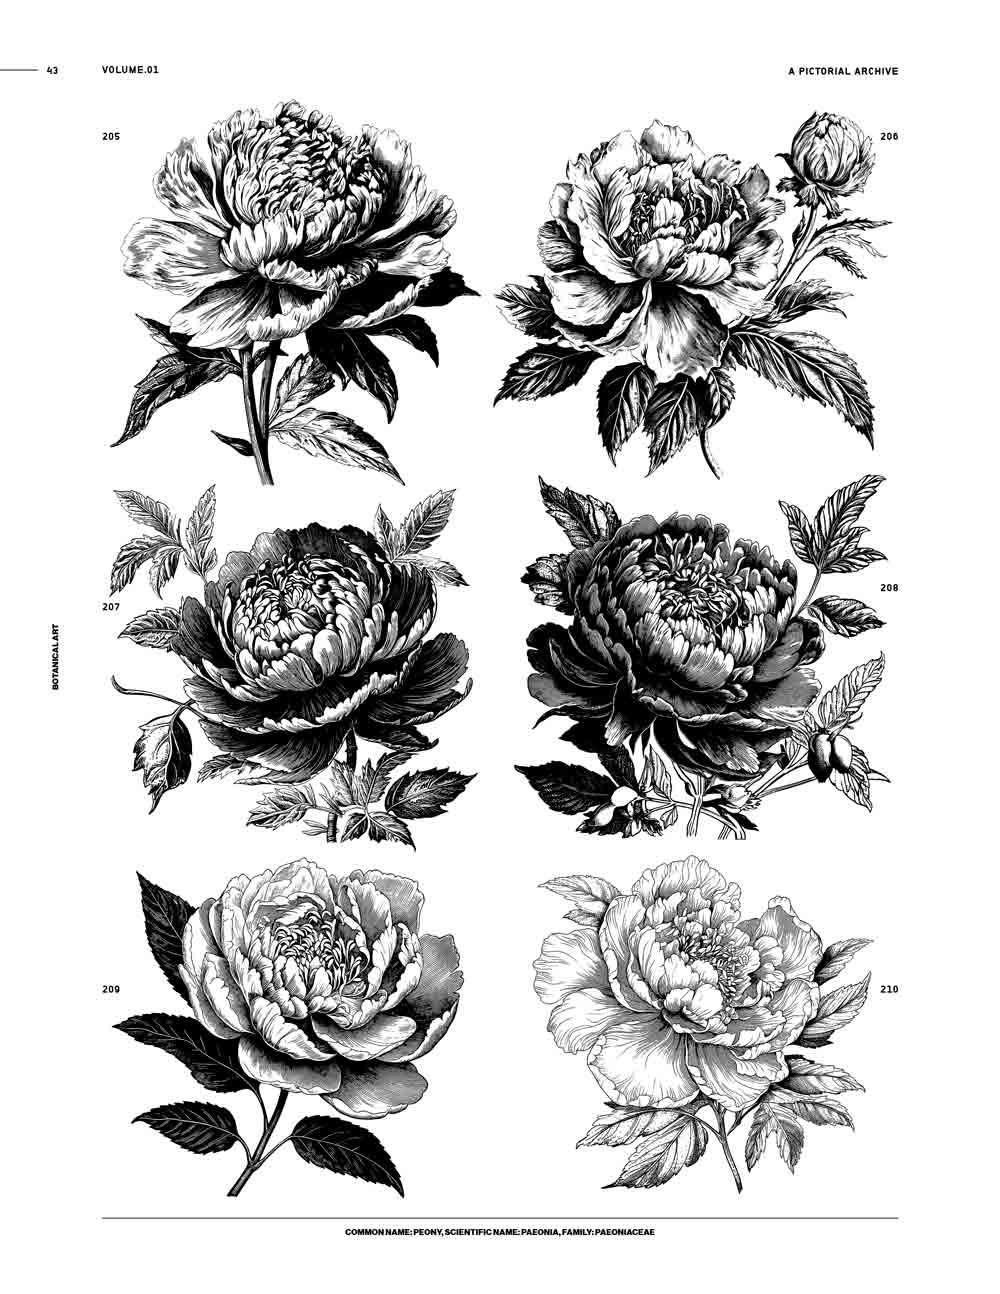 Why Draw in Black and White? - Peony and Parakeet